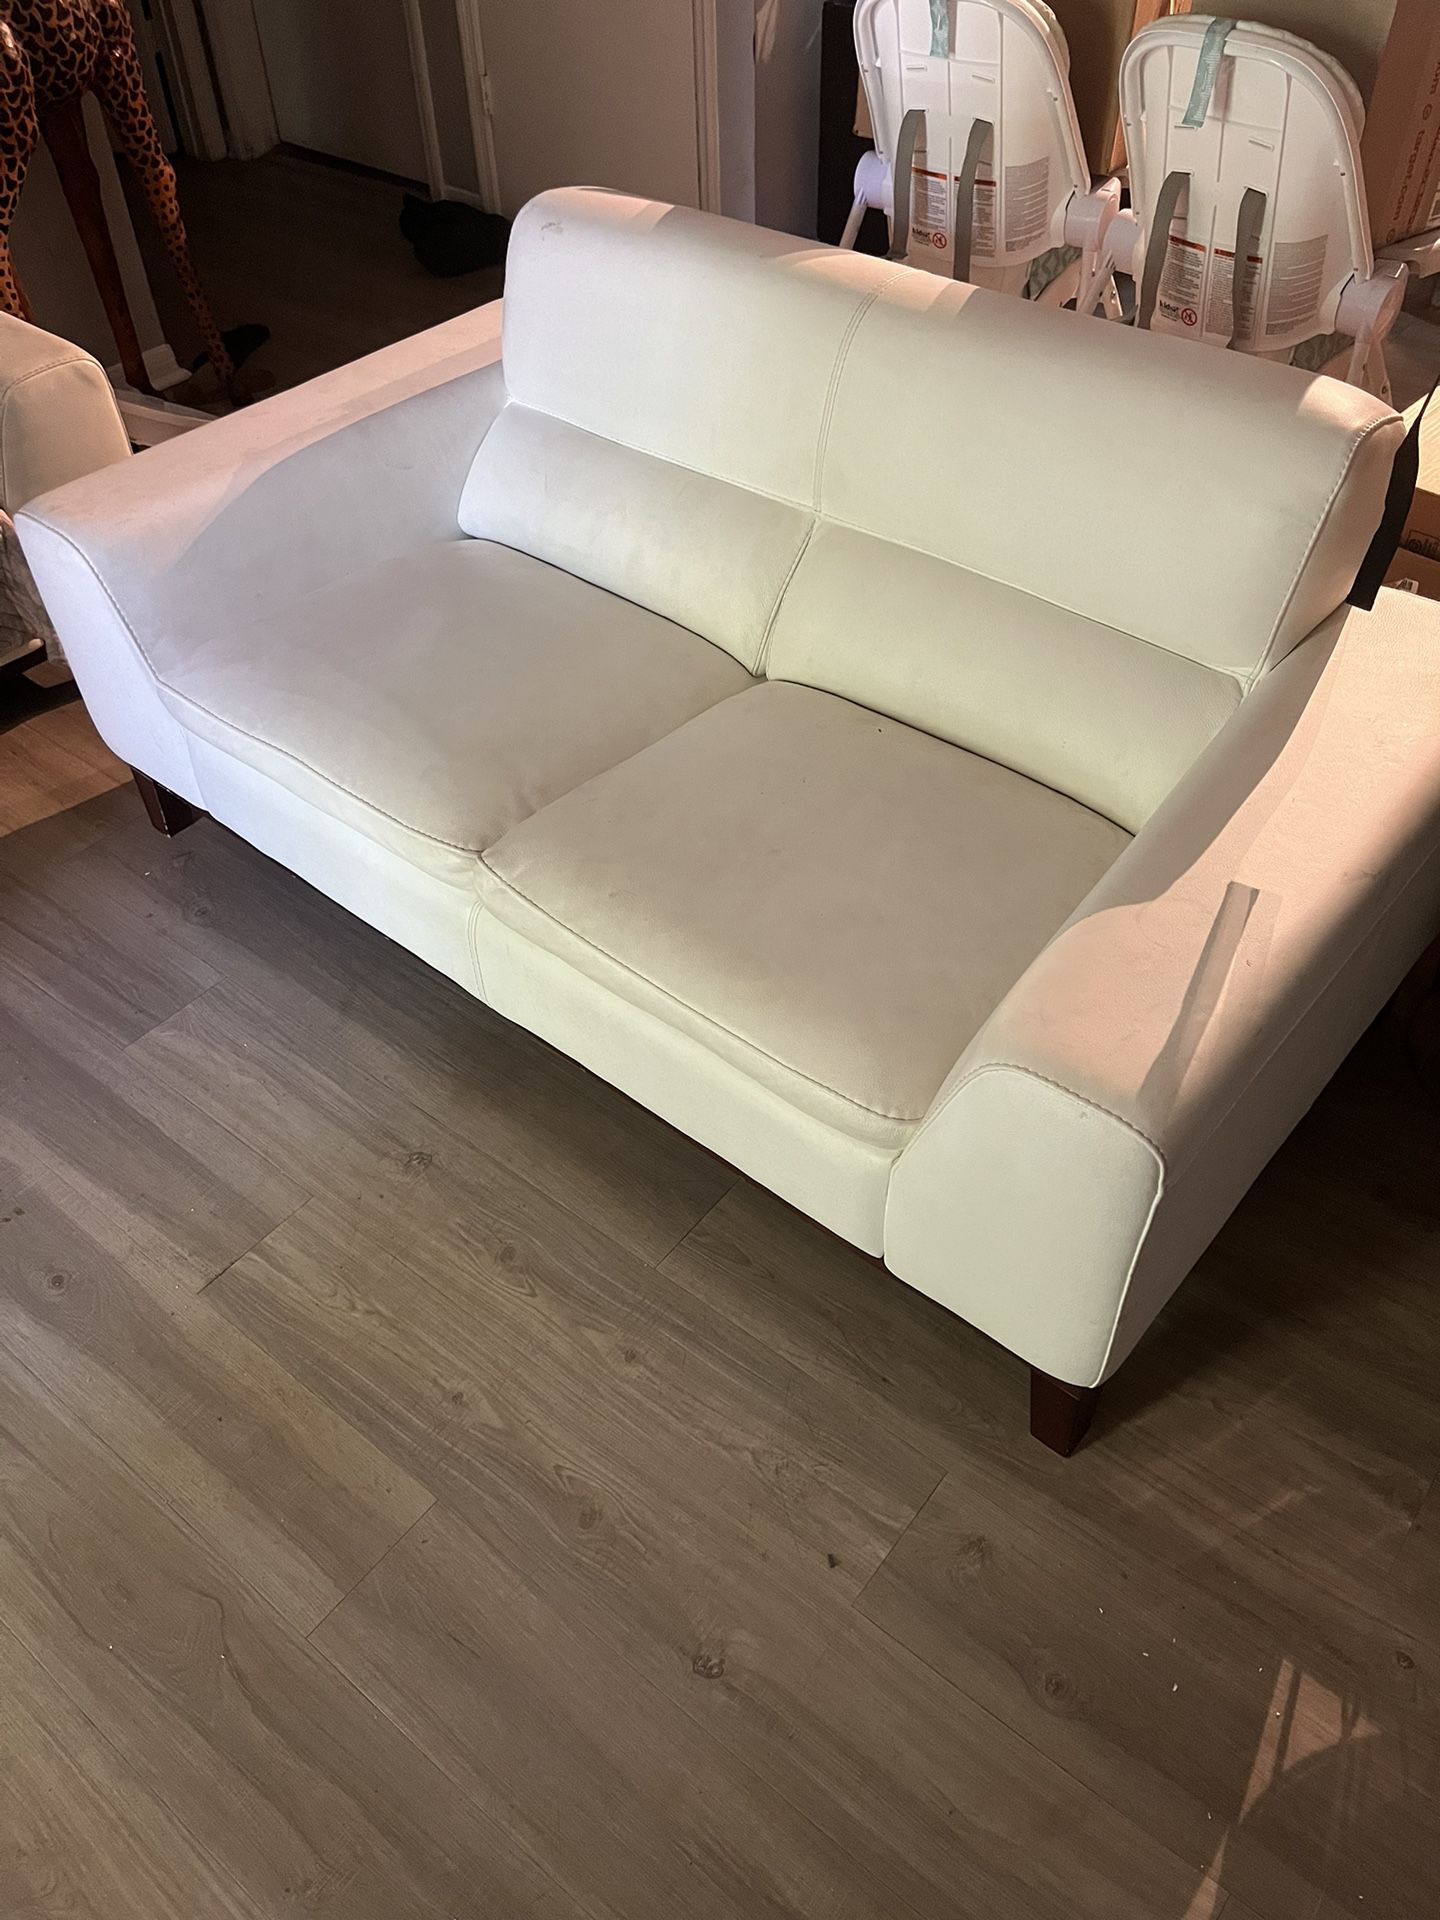 2 PIECE WHITE COUCH SET VERY CLEAN